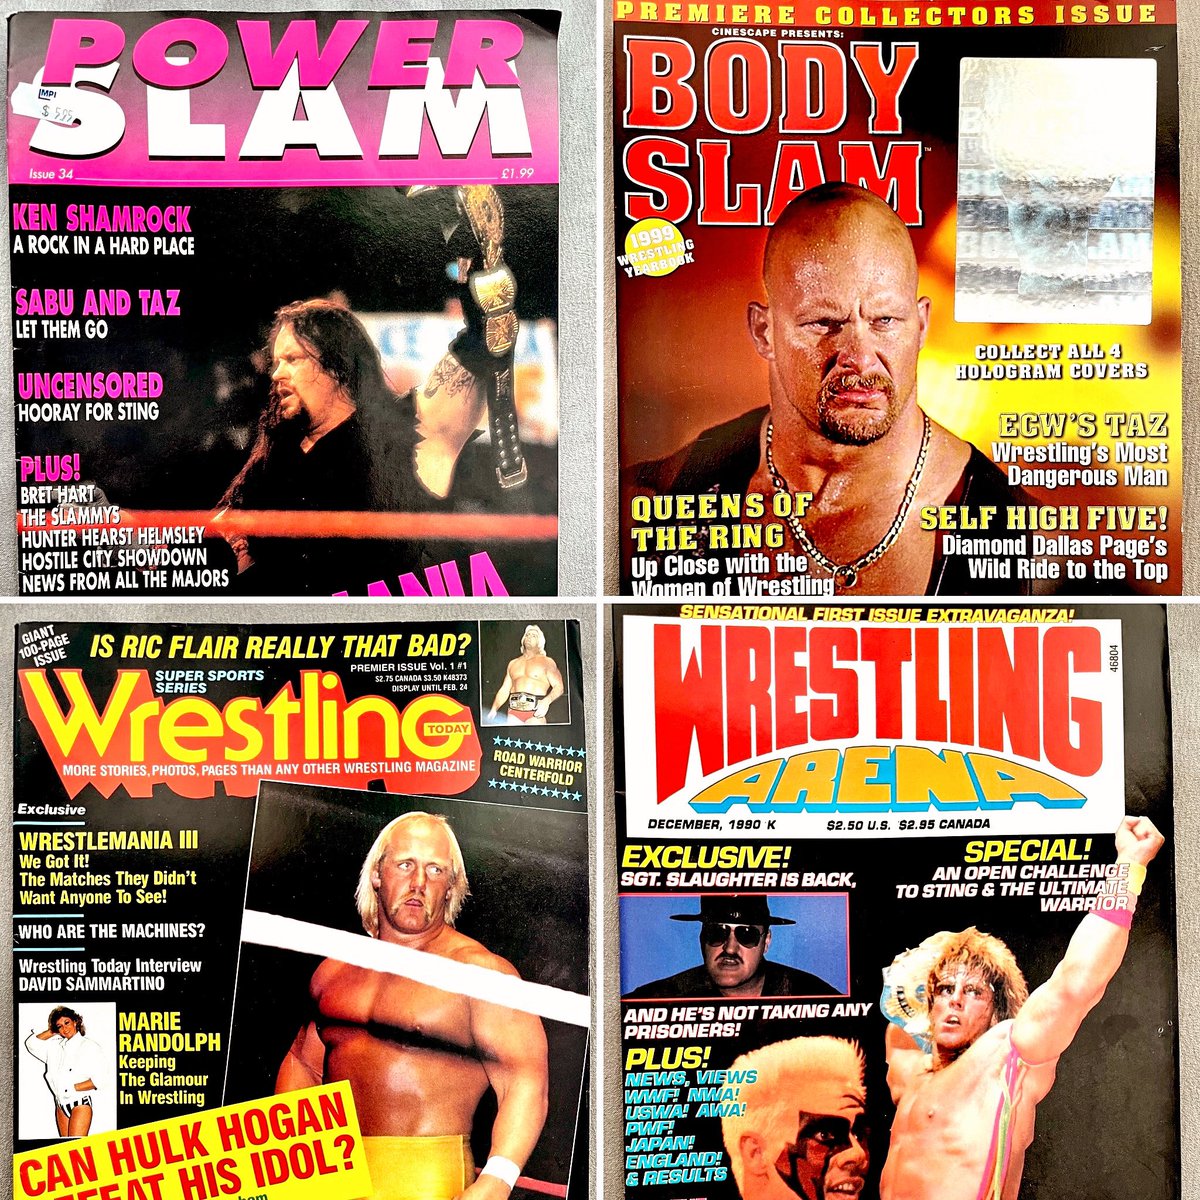 Get these classic back issues of wrestling magazines. Website in bio. #wrestling #wwe #vintage #wcw #wwf #wrestlingmagazines #aew #oldschoolwrestling #oldschoolwrestlingmagazines #90swrestling #80swrestling @oldschoolmags @WWE